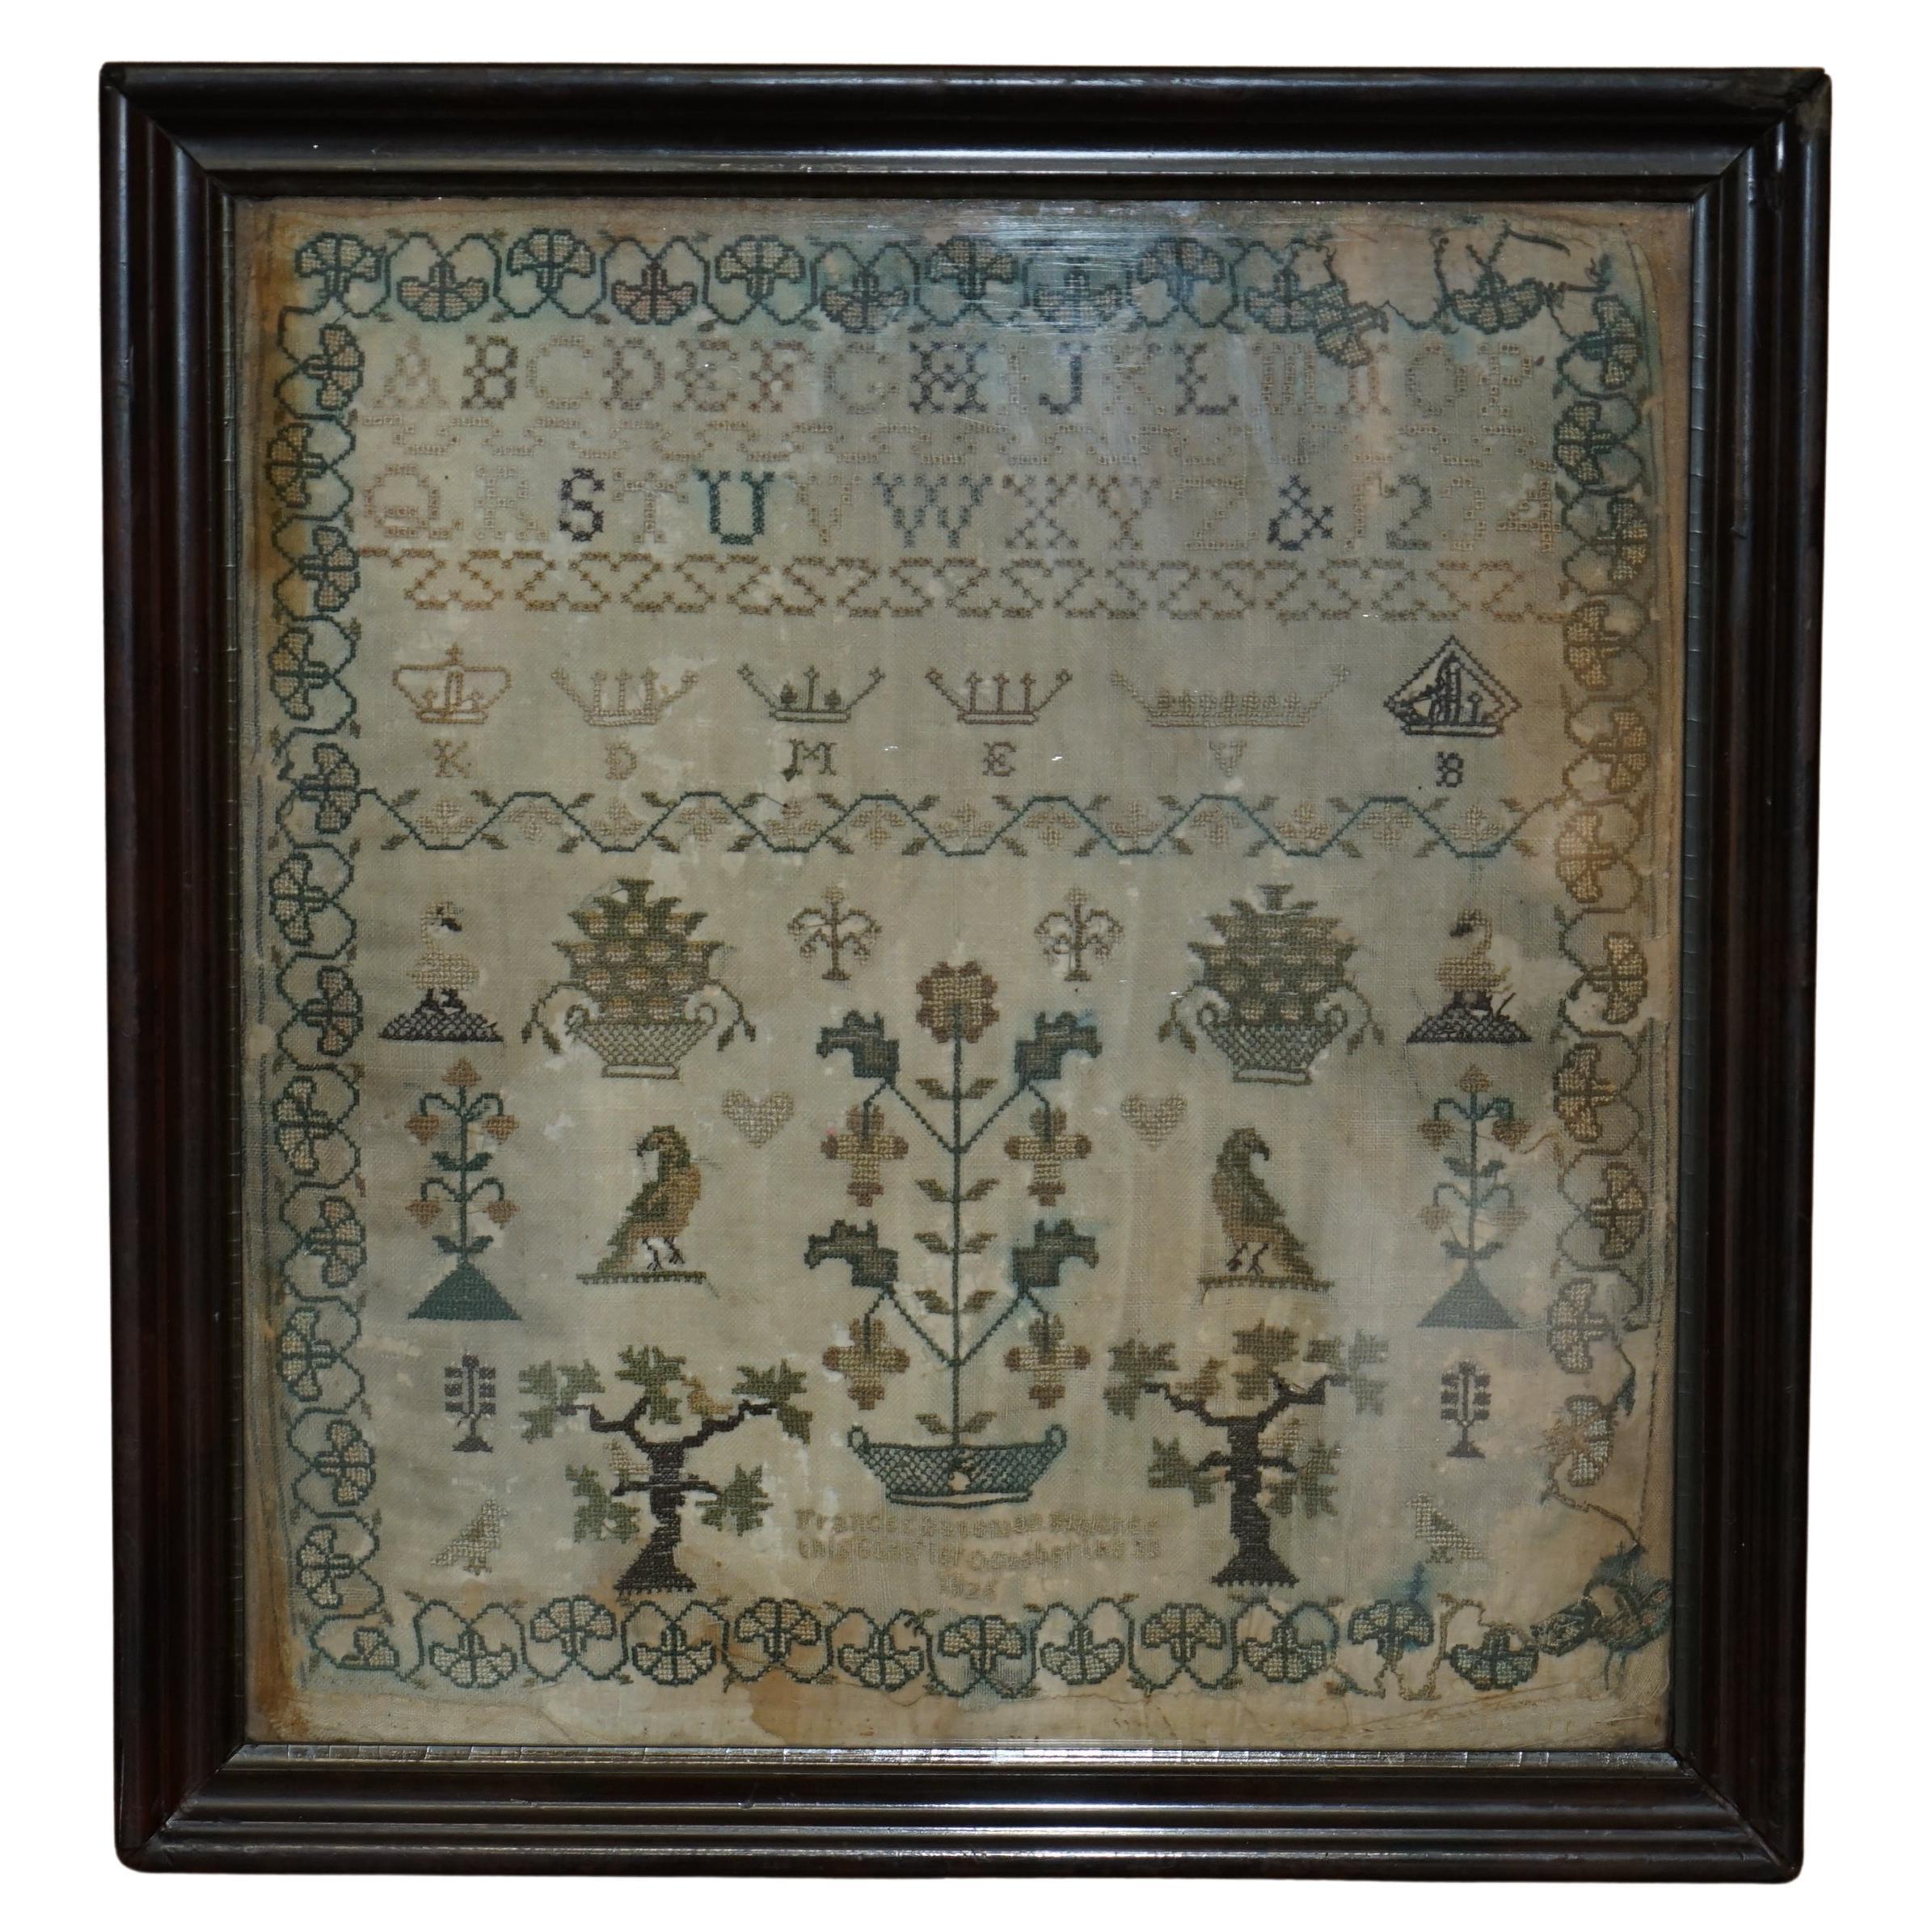 ANTIQUE 1838 ORIGINAL EARLY ViCTORIAN NEEDLEWORK SAMPLER IN THE PERIOD FRAME